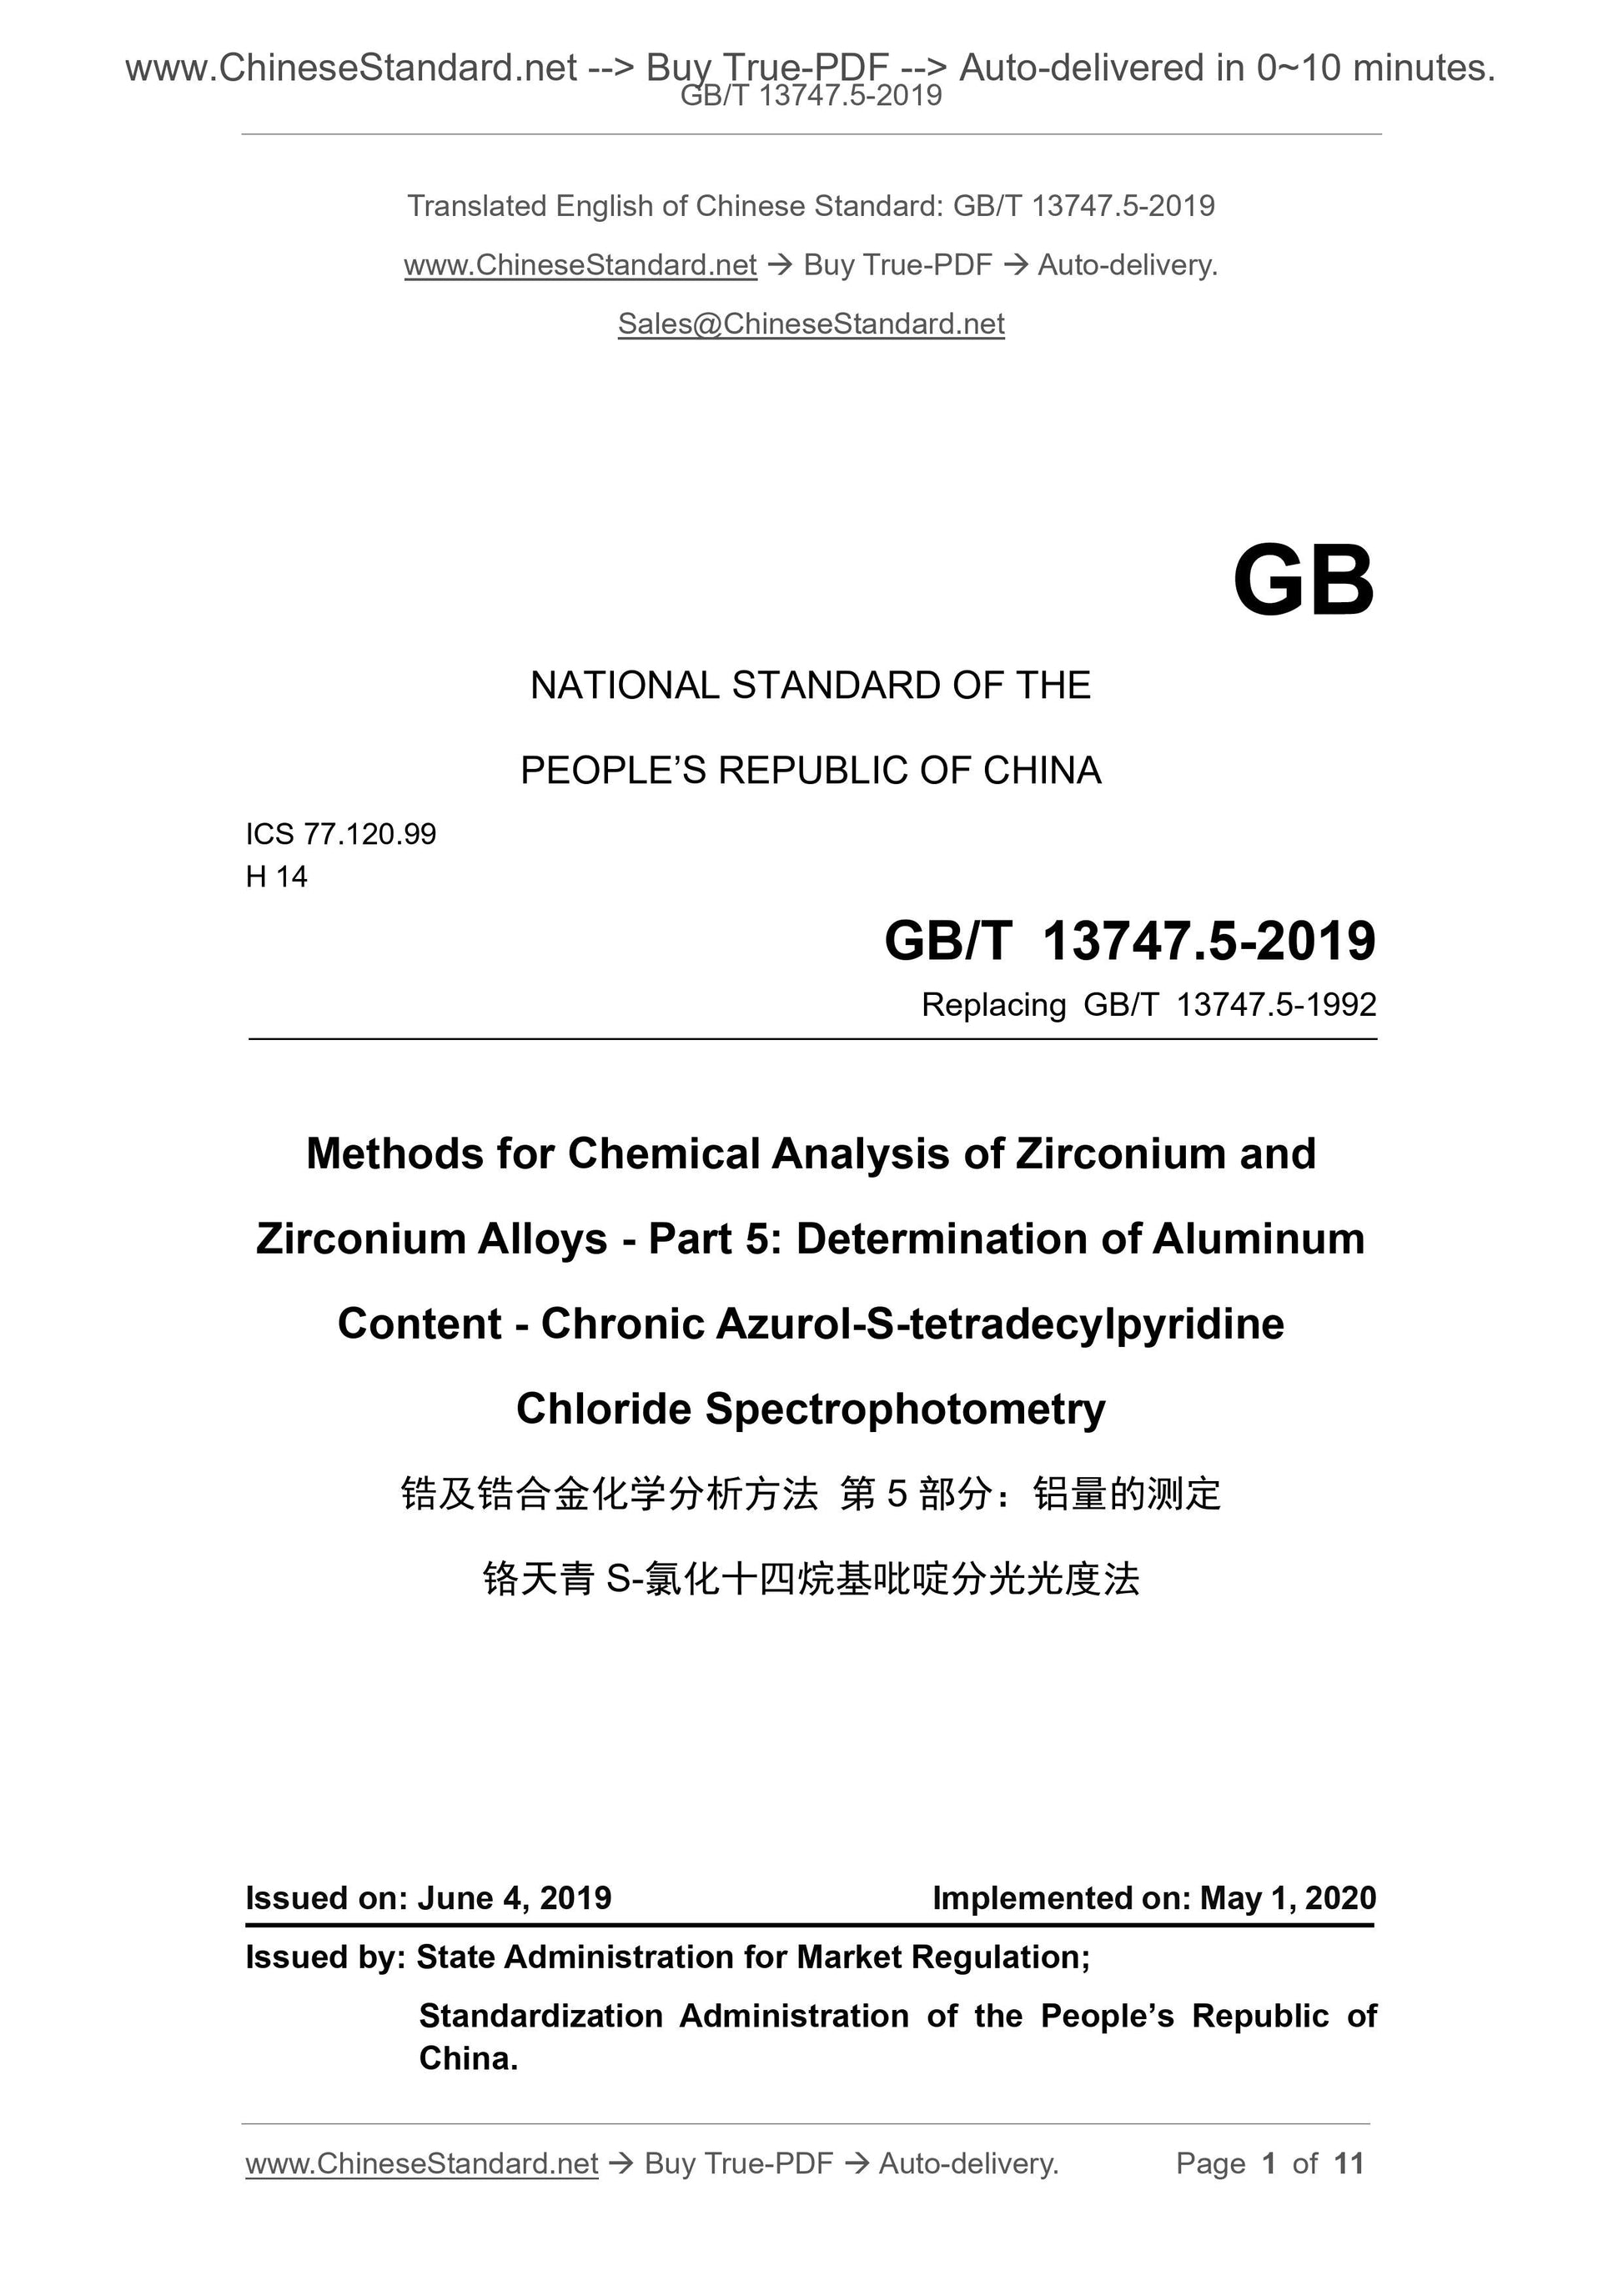 GB/T 13747.5-2019 Page 1